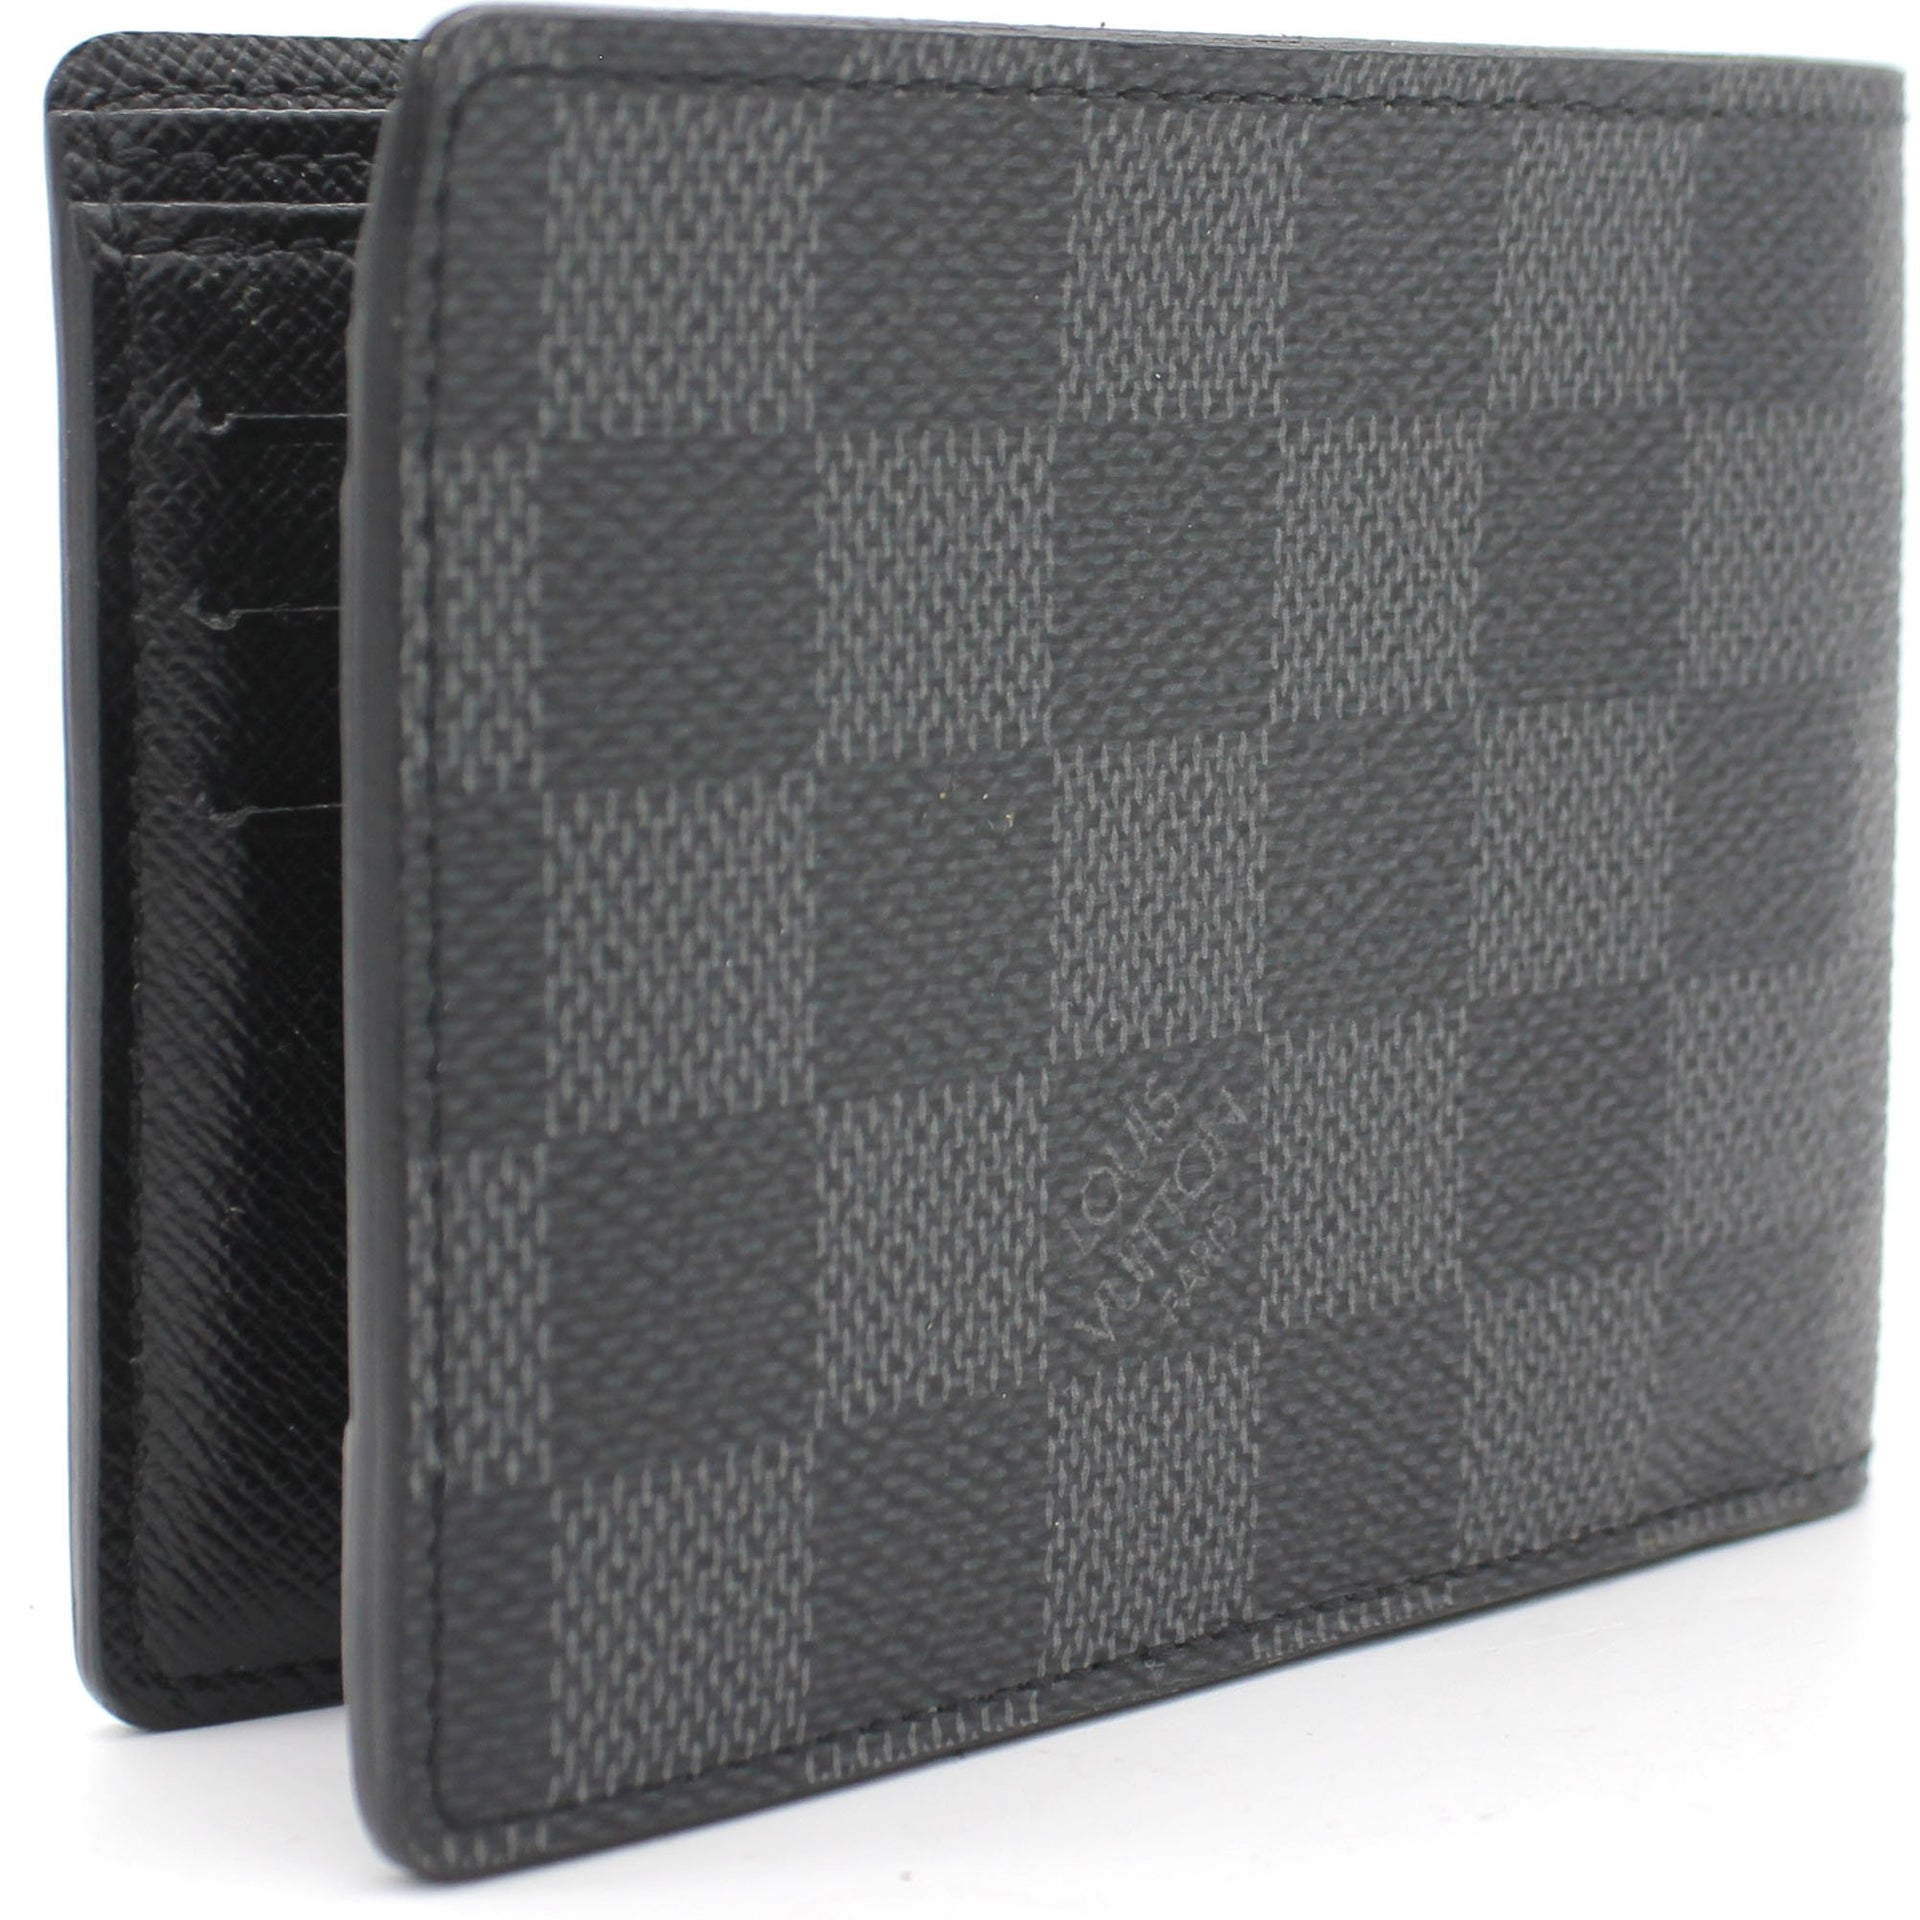 Multiple Wallet Monogram Other - Men - Small Leather Goods